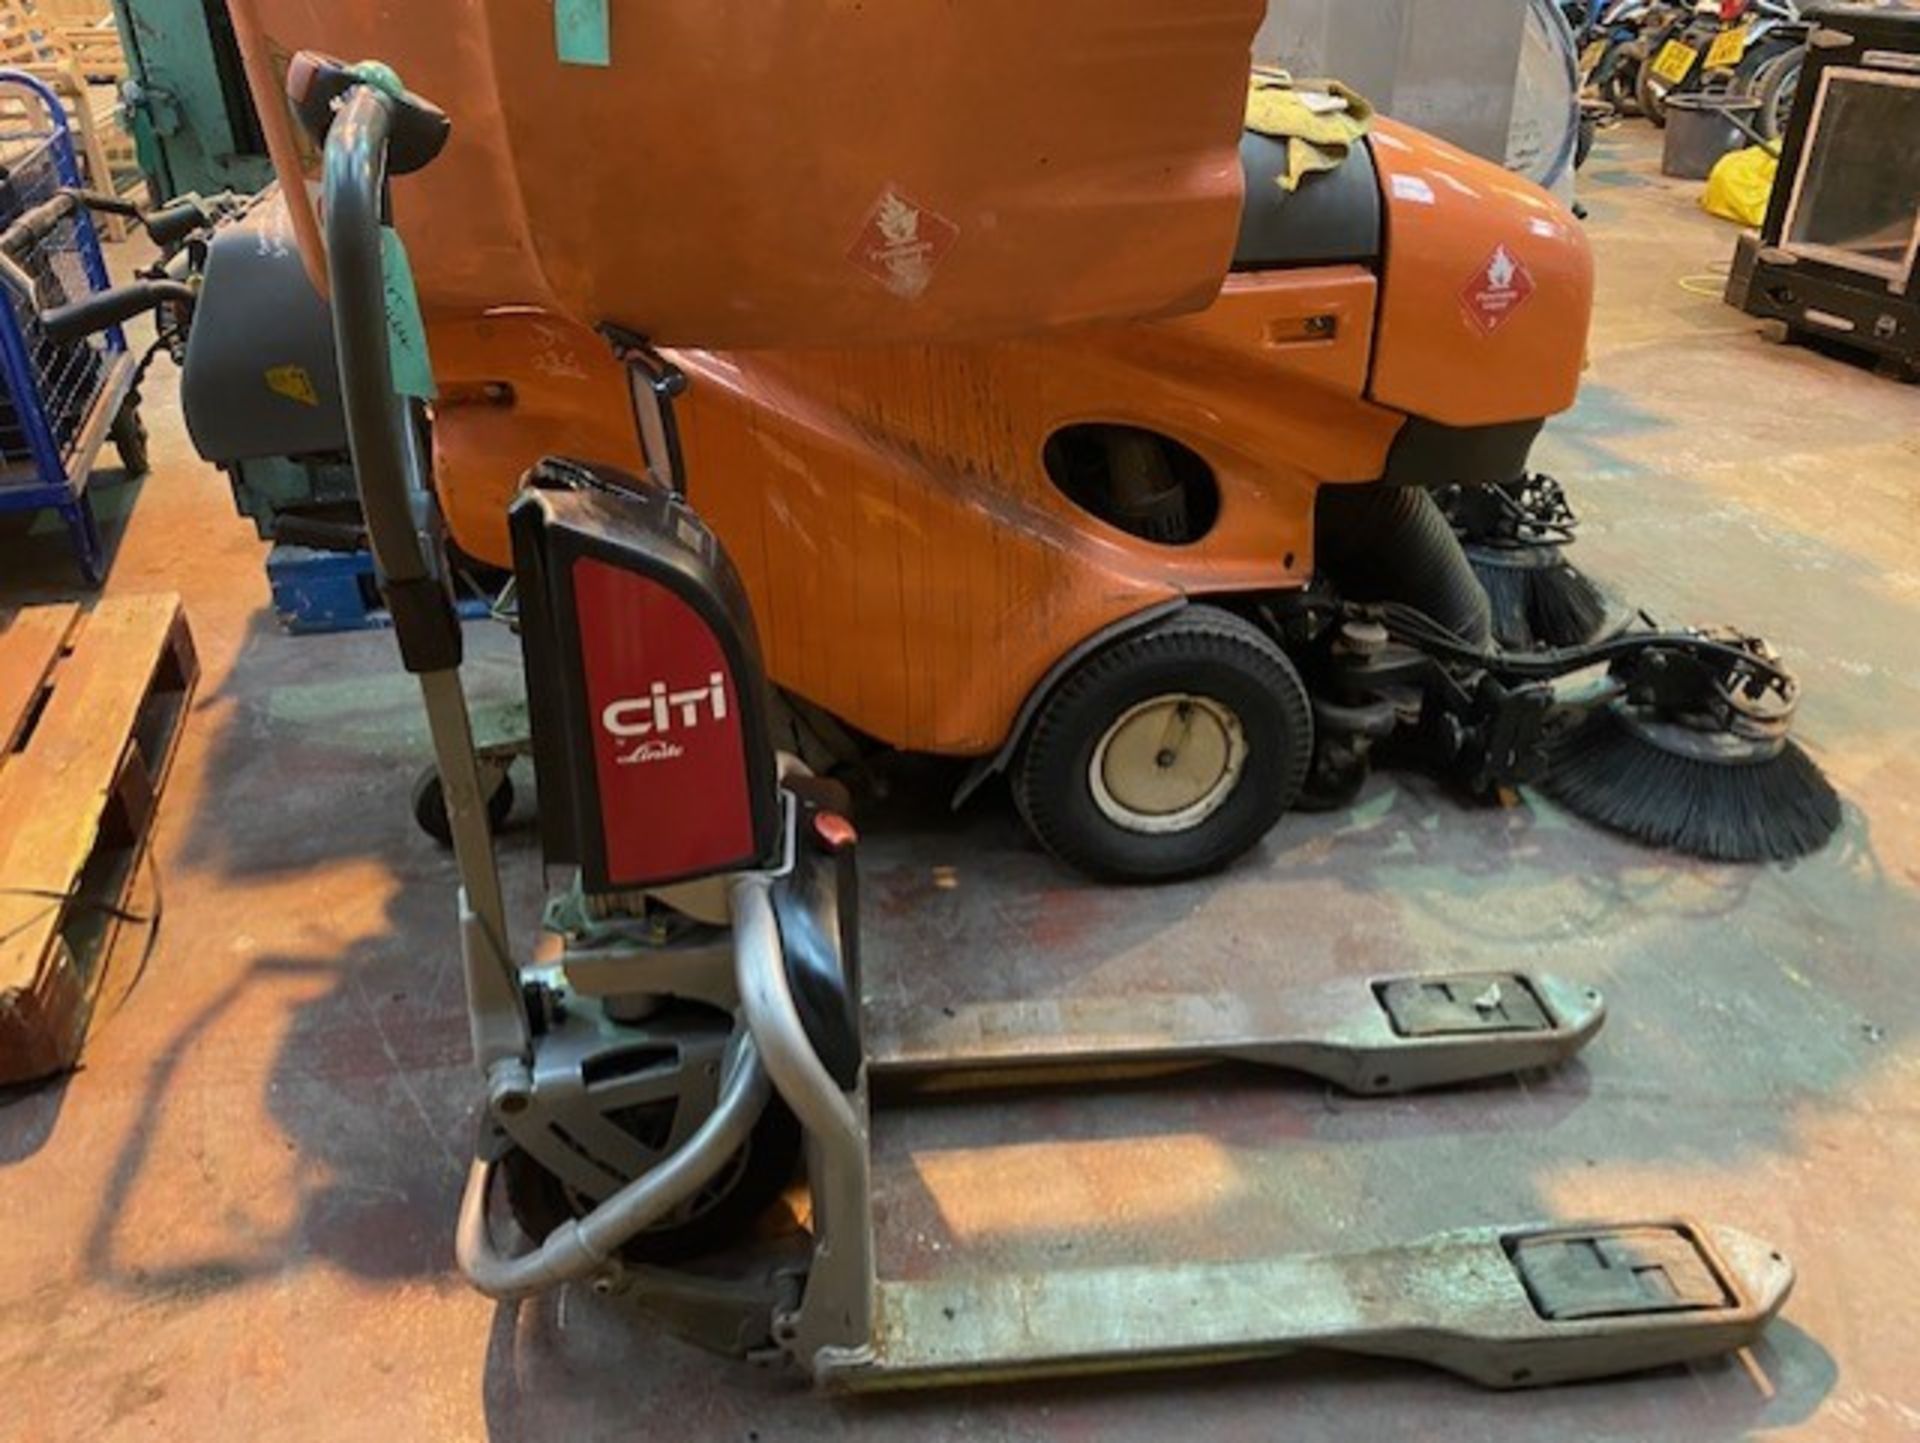 Linde City Pallet truck battery operated but no battery included